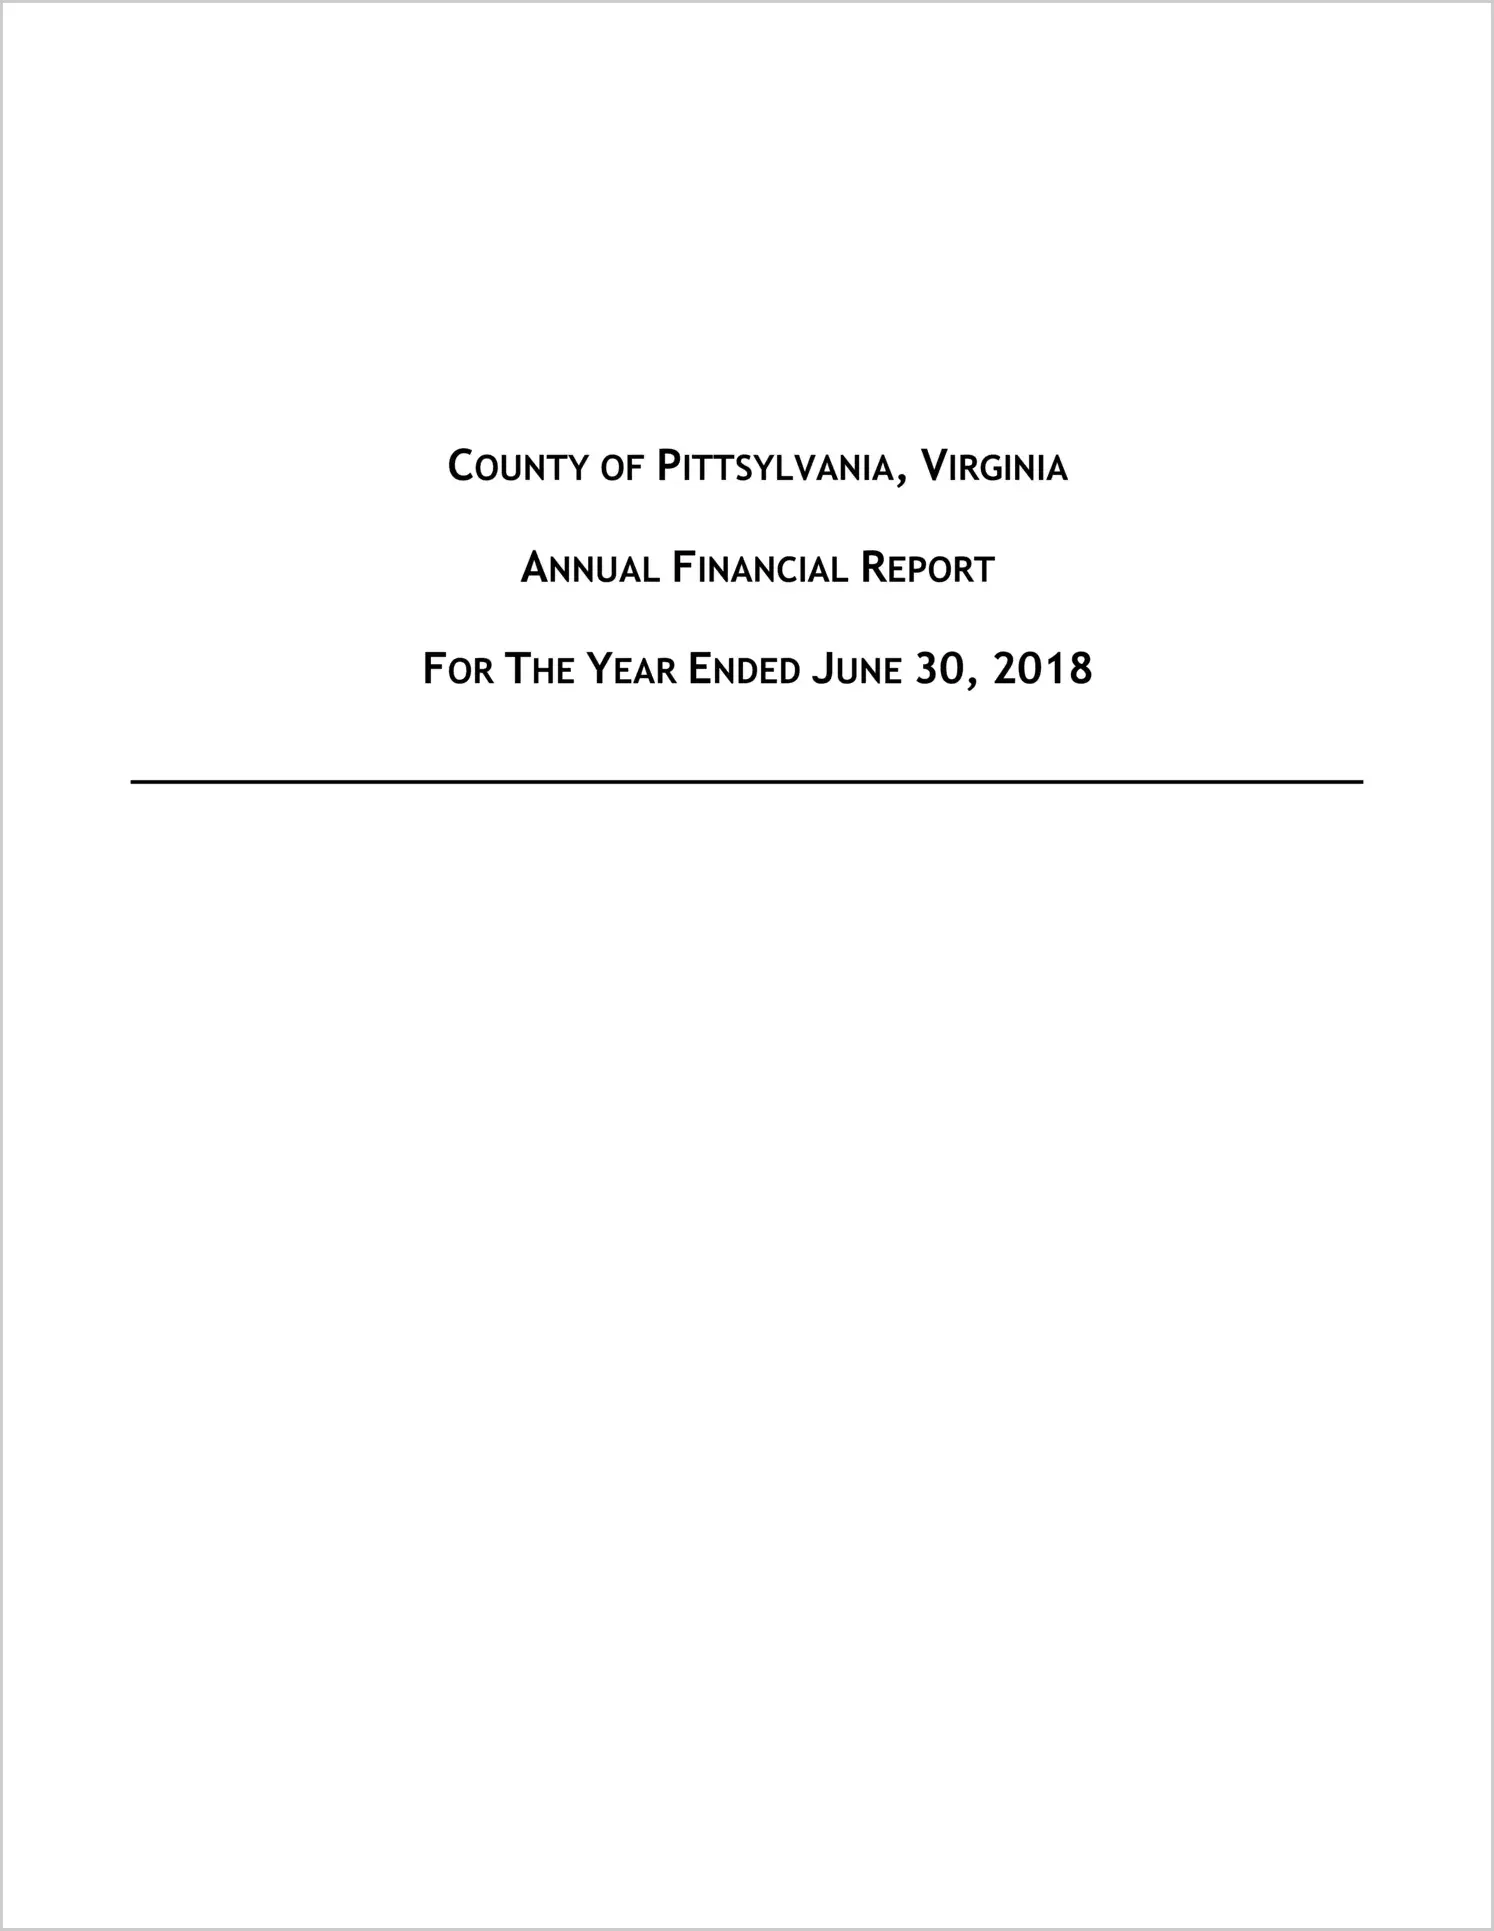 2018 Annual Financial Report for County of Pittsylvania